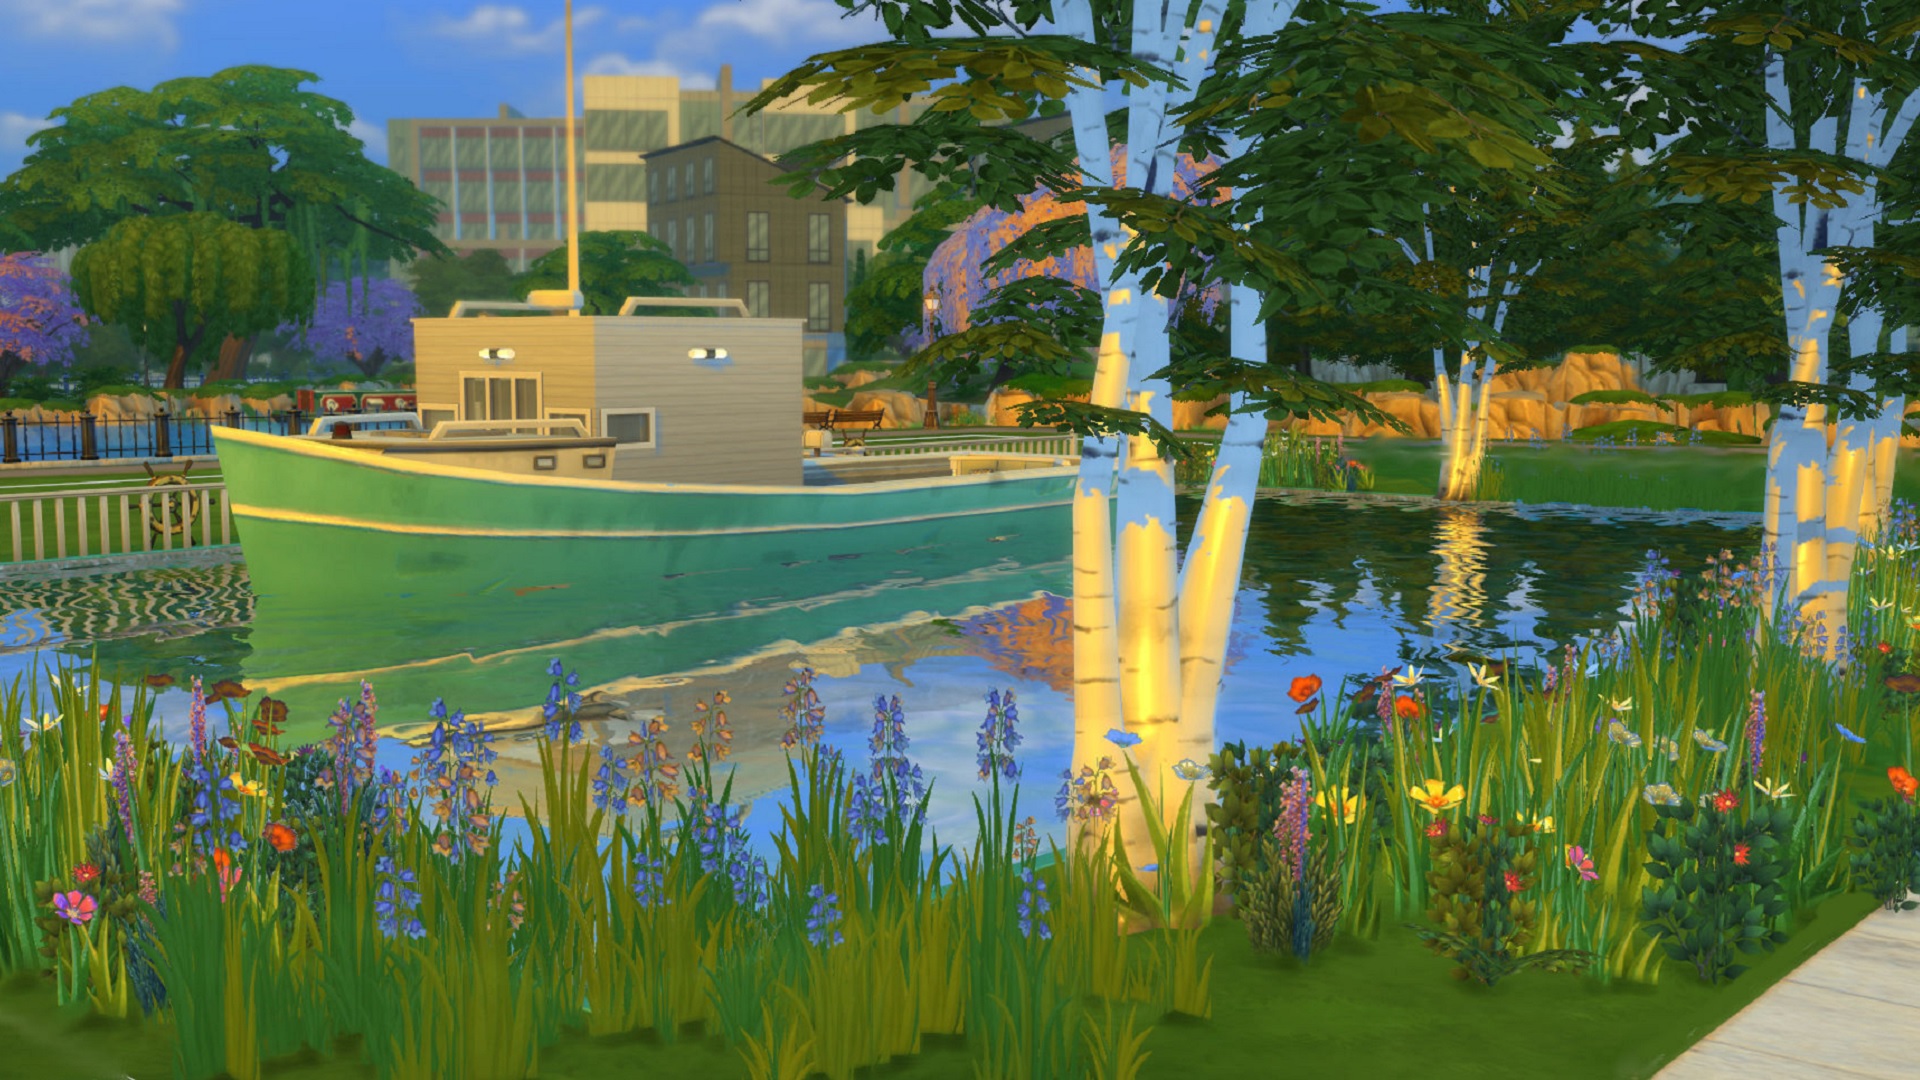 Sims 4 mod House Boat: A house boat on the water